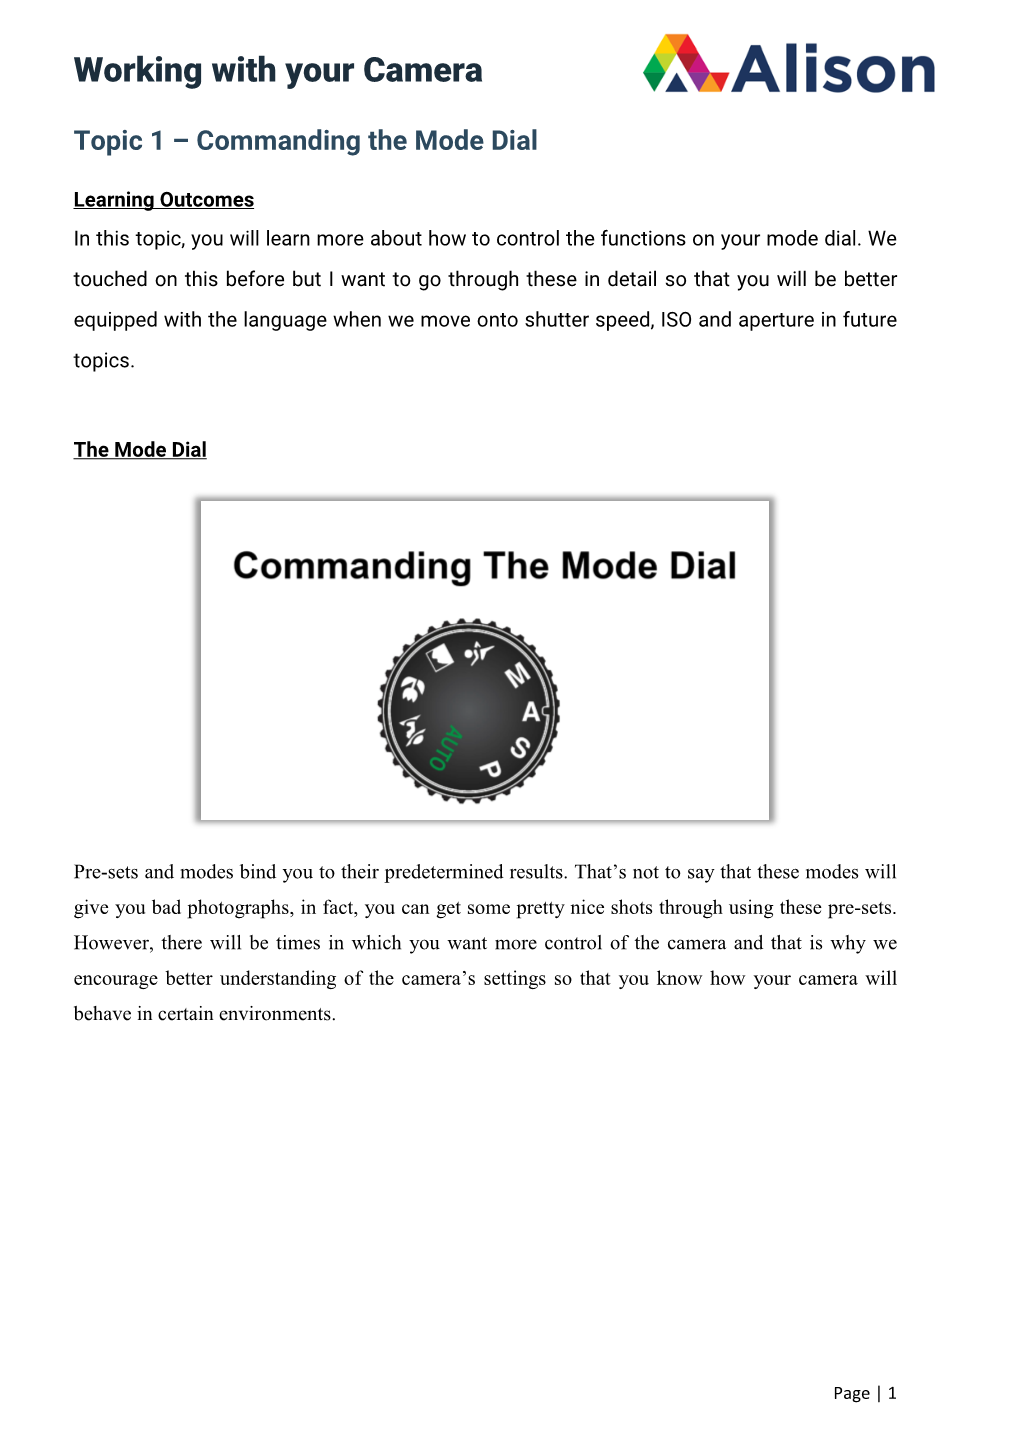 Topic 1 Commanding the Mode Dial